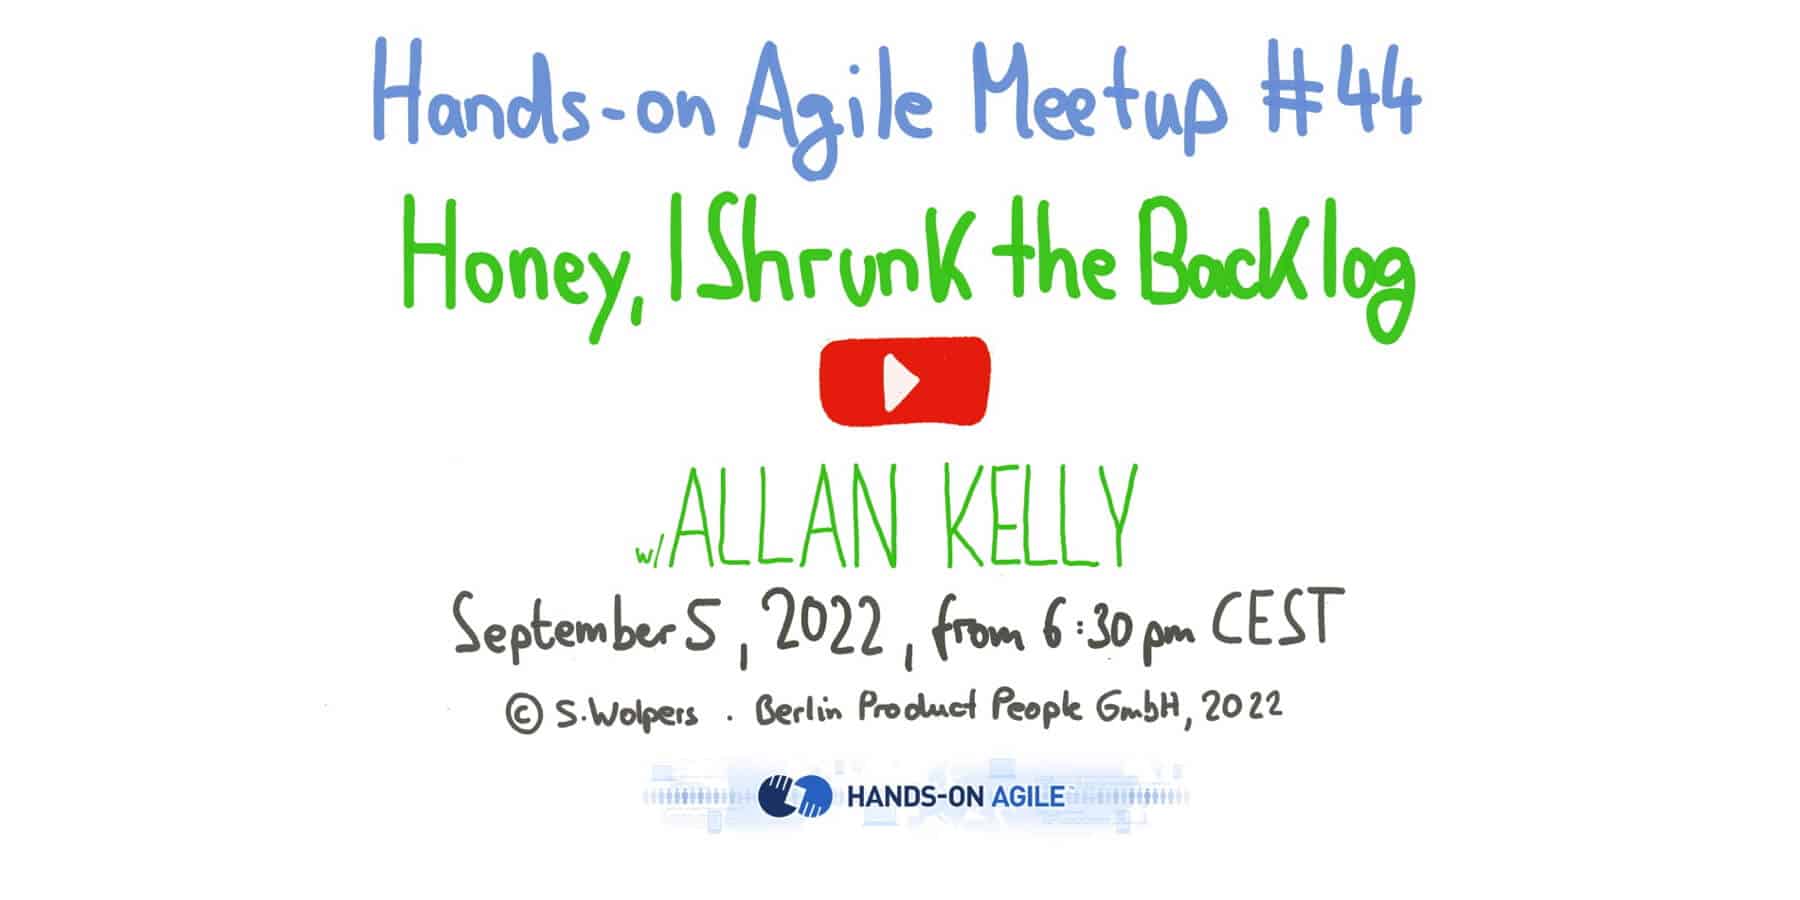 Allan Kelly: Honey, I Shrunk the Backlog — Hands-on Agile 44 — Berlin Product People GmbH